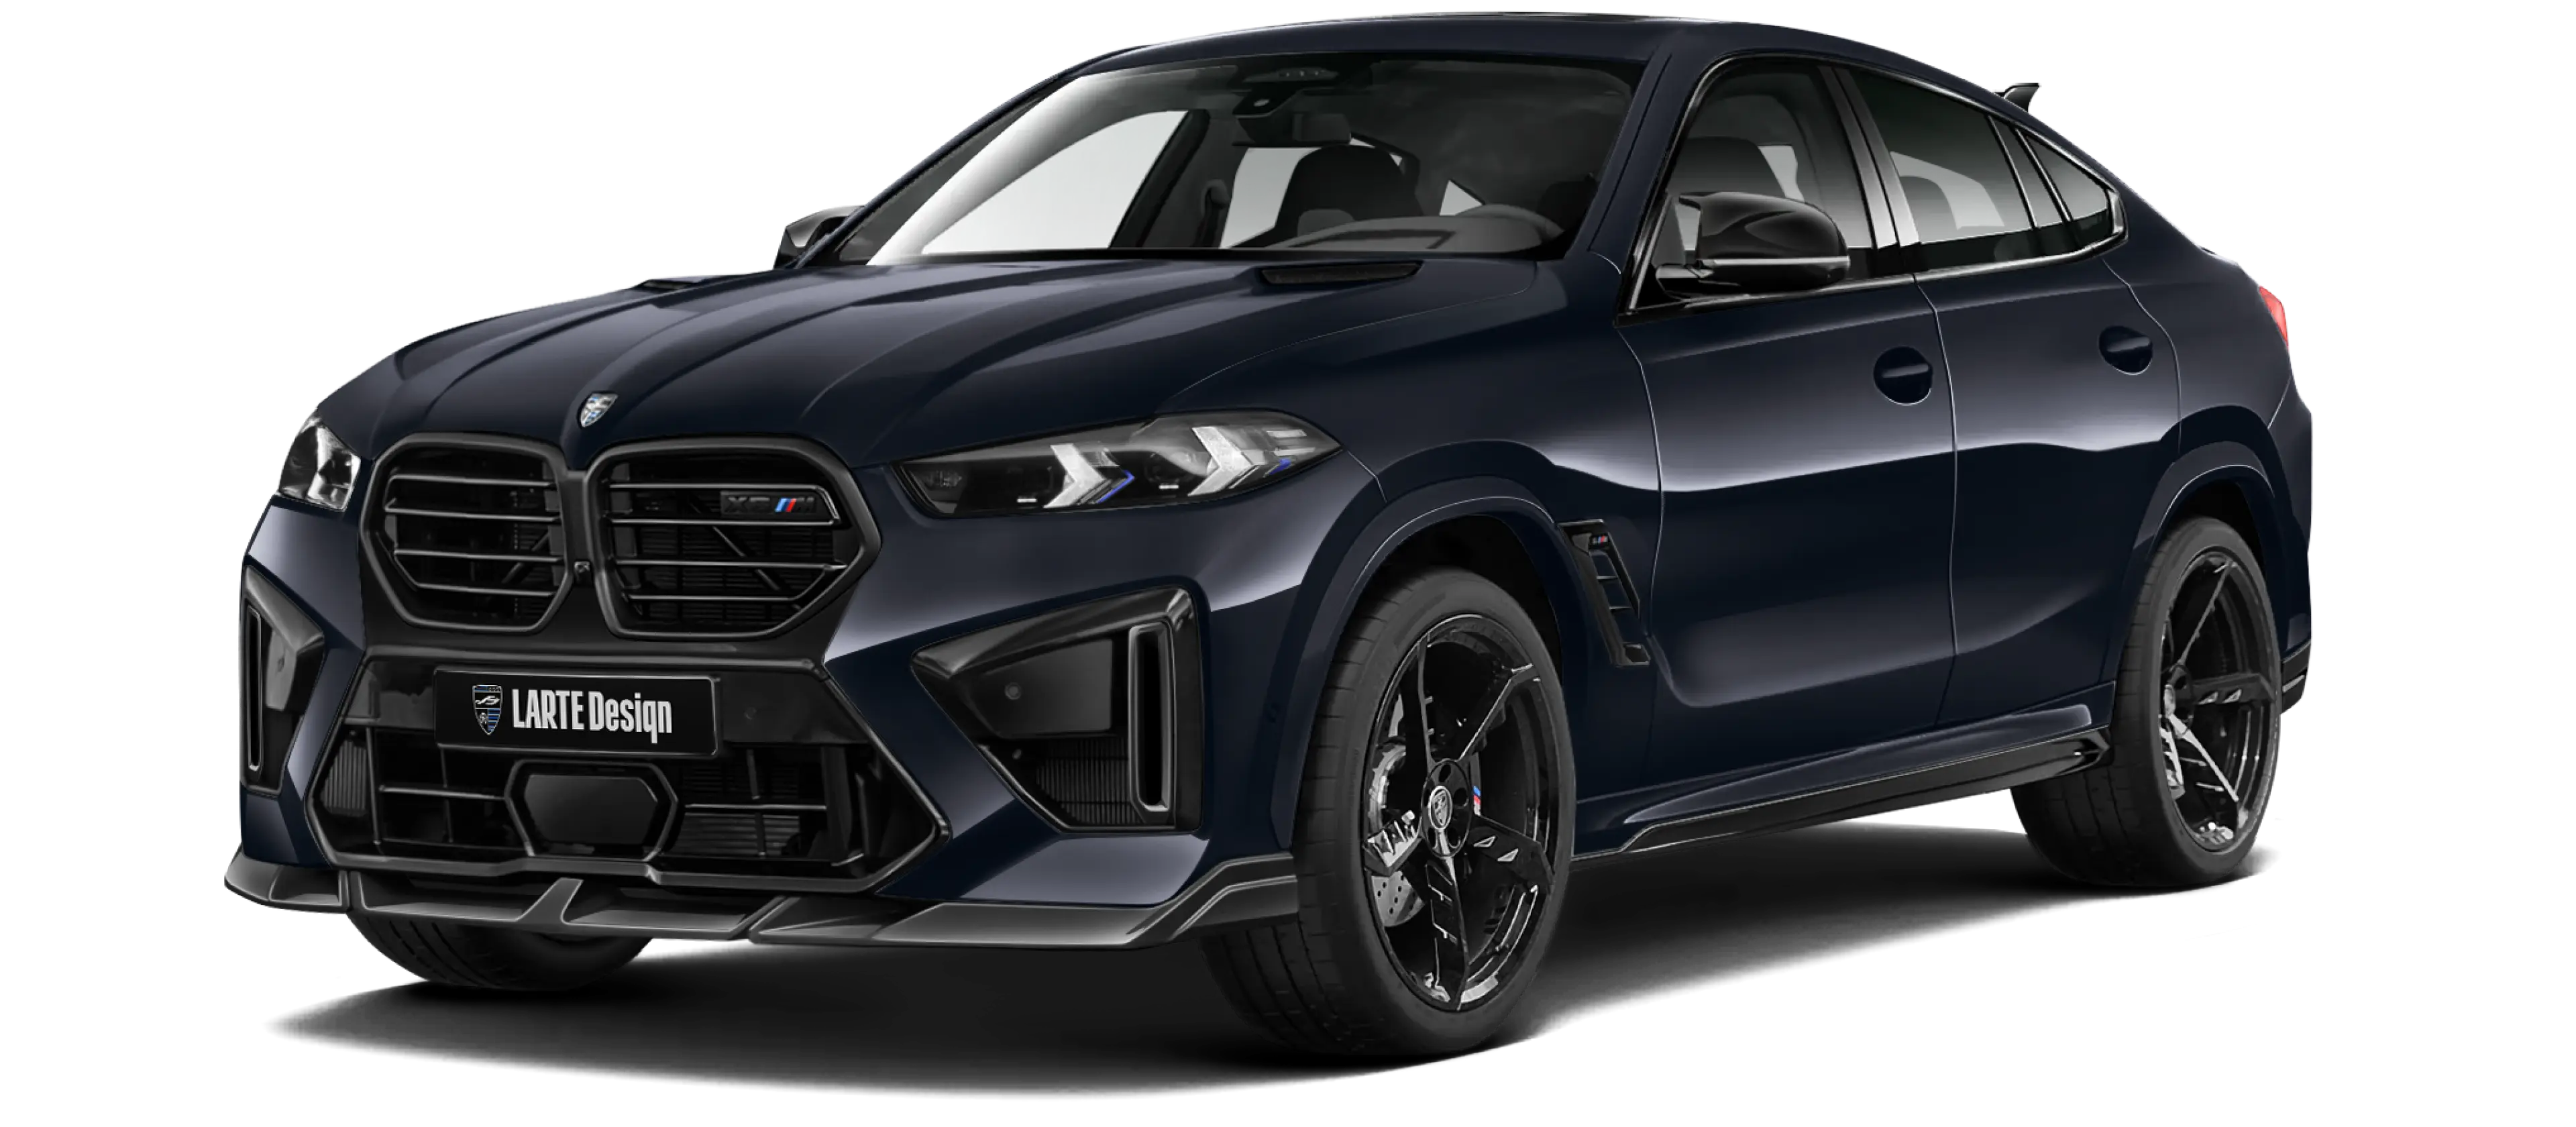 BMW X6M F96 LCI 2023 with painted body kit: front view shown in Black carbon